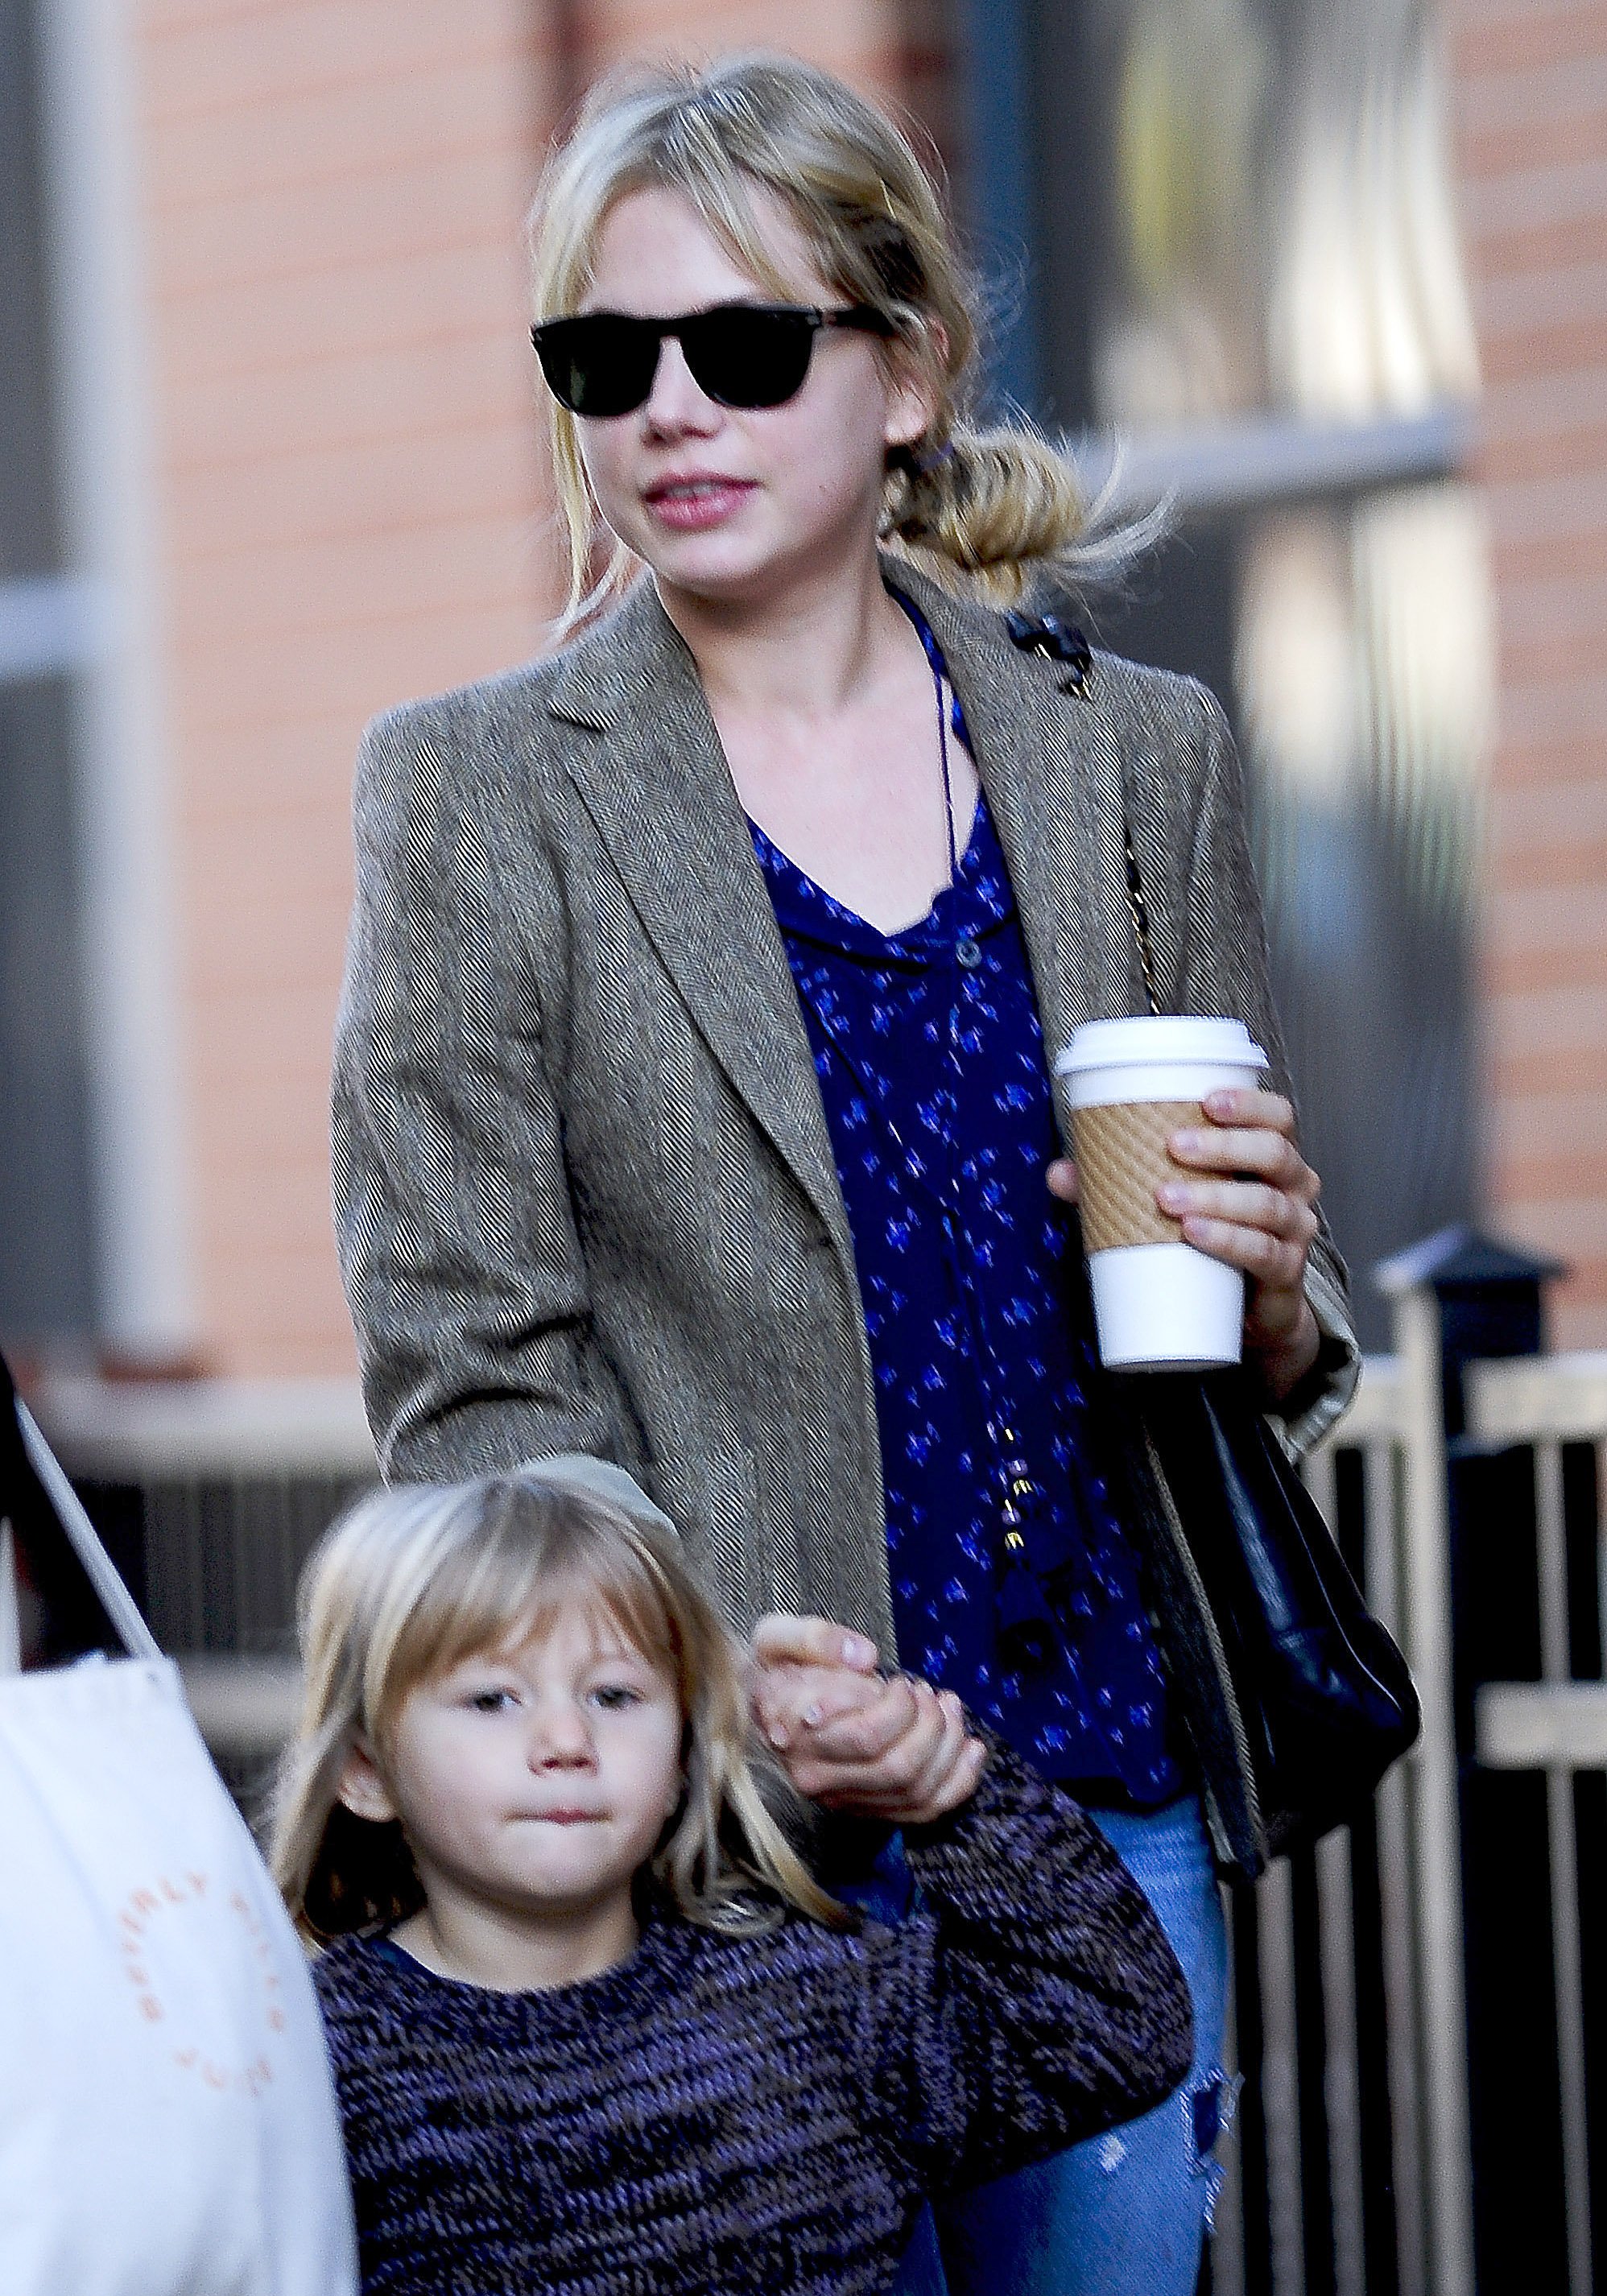 Matilda Ledger and Michelle Williams spotted in New York City on October 30, 2009 | Source: Getty Images